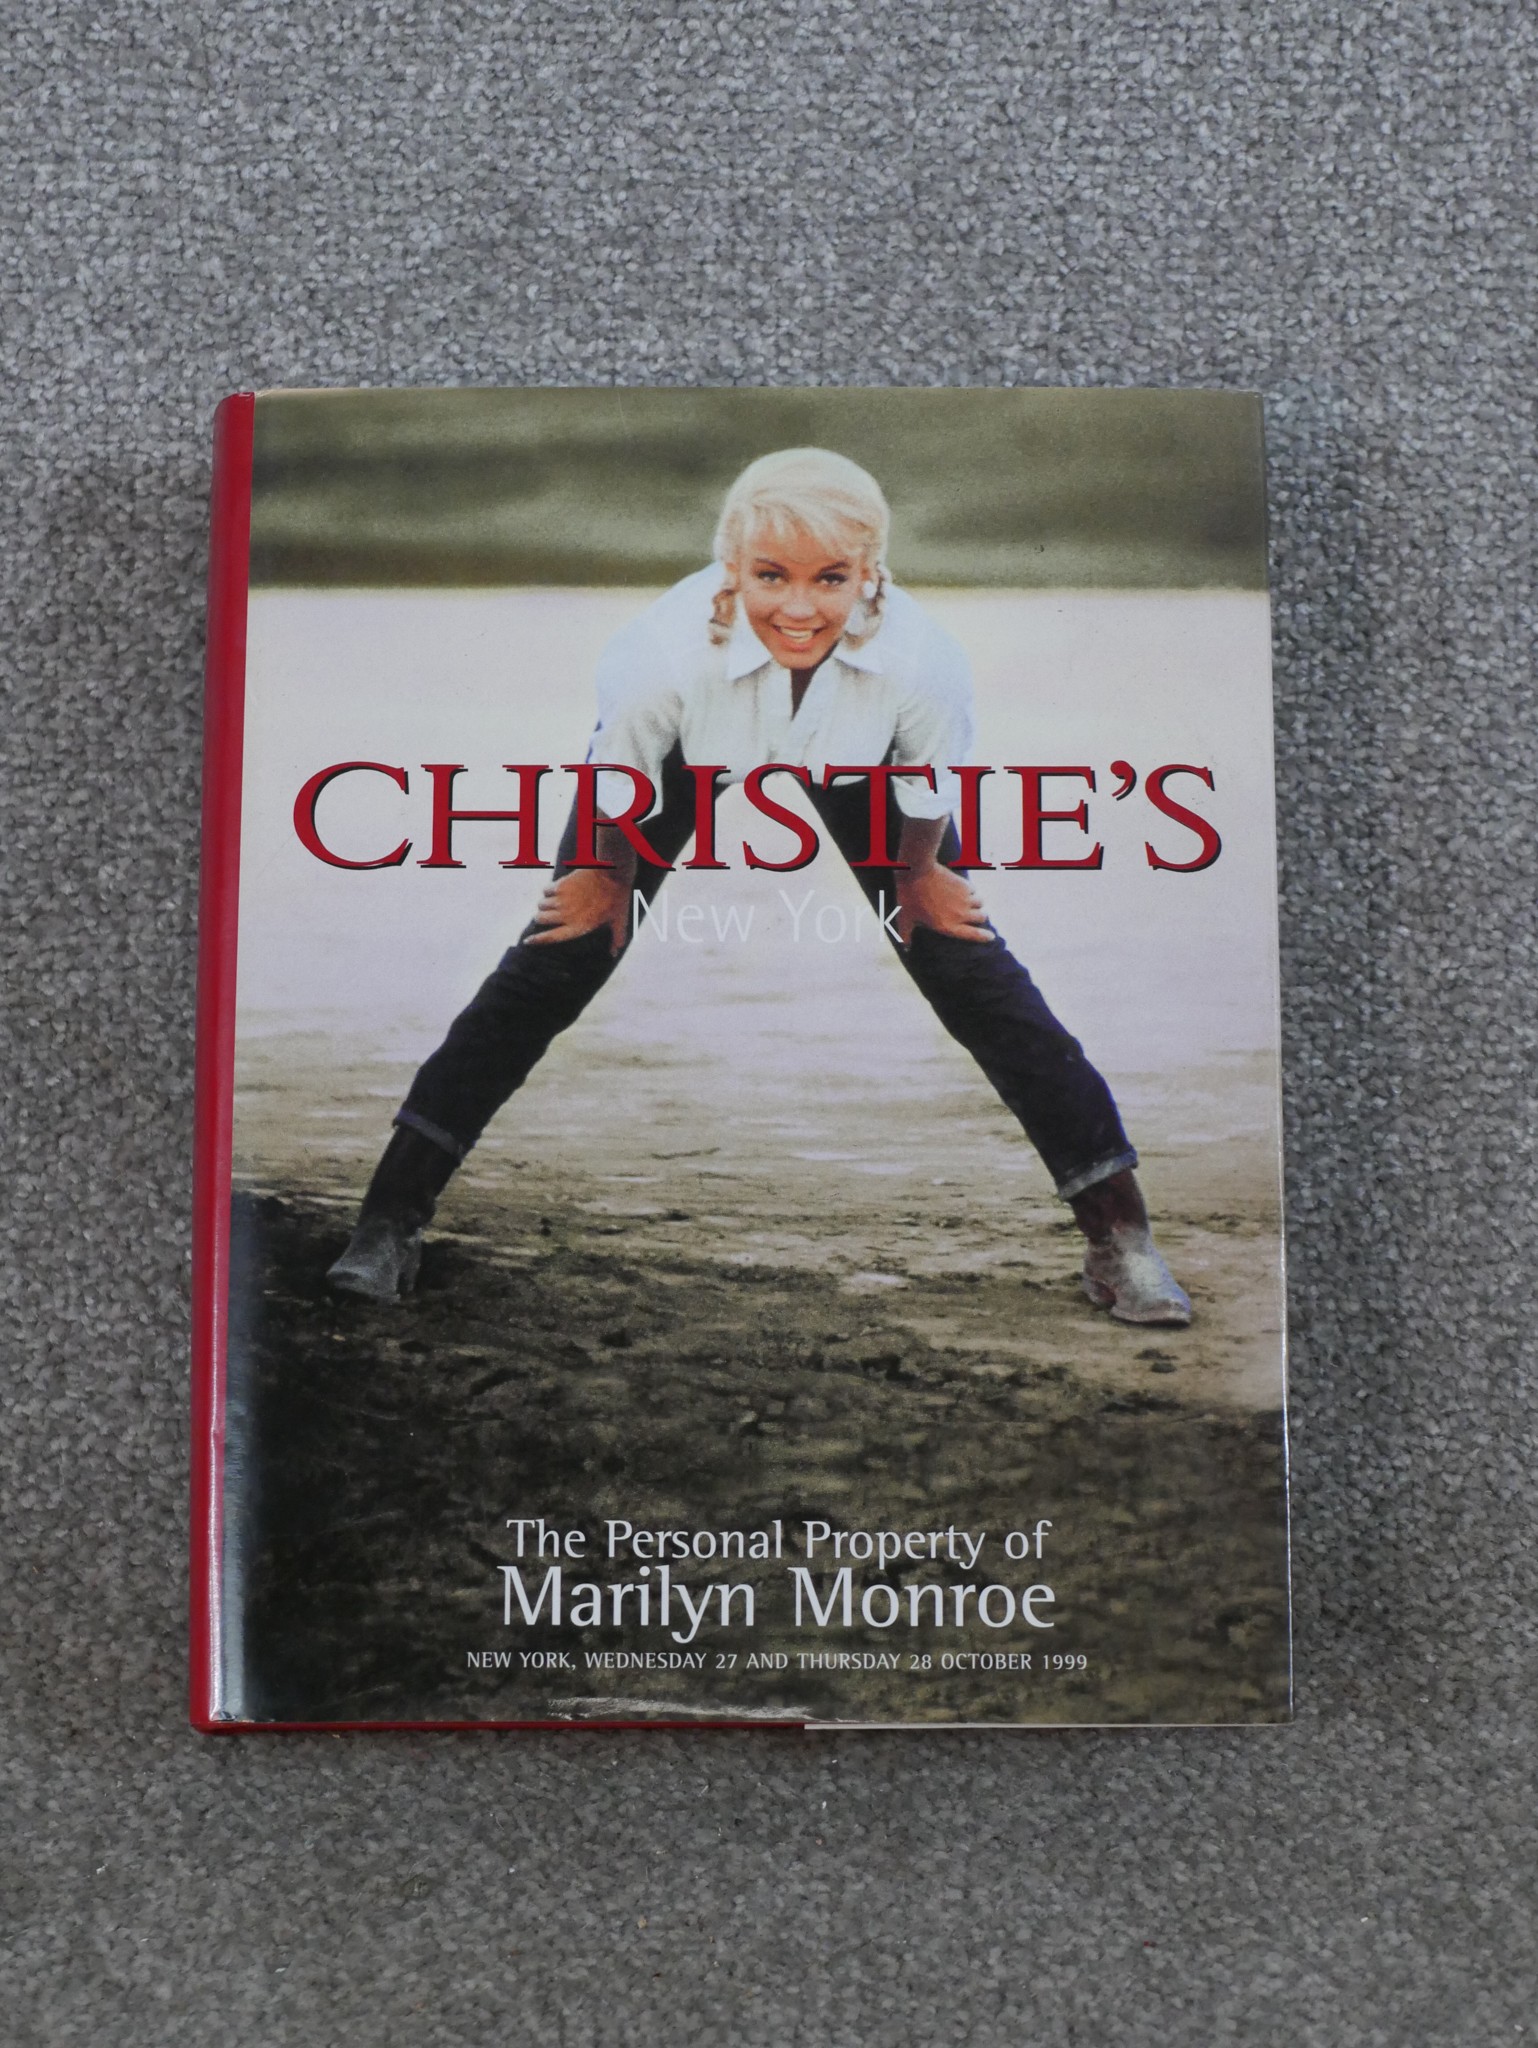 The Marilyn Monroe Collection Catalogue: The Personal Property of Marilyn Monroe held at Christies